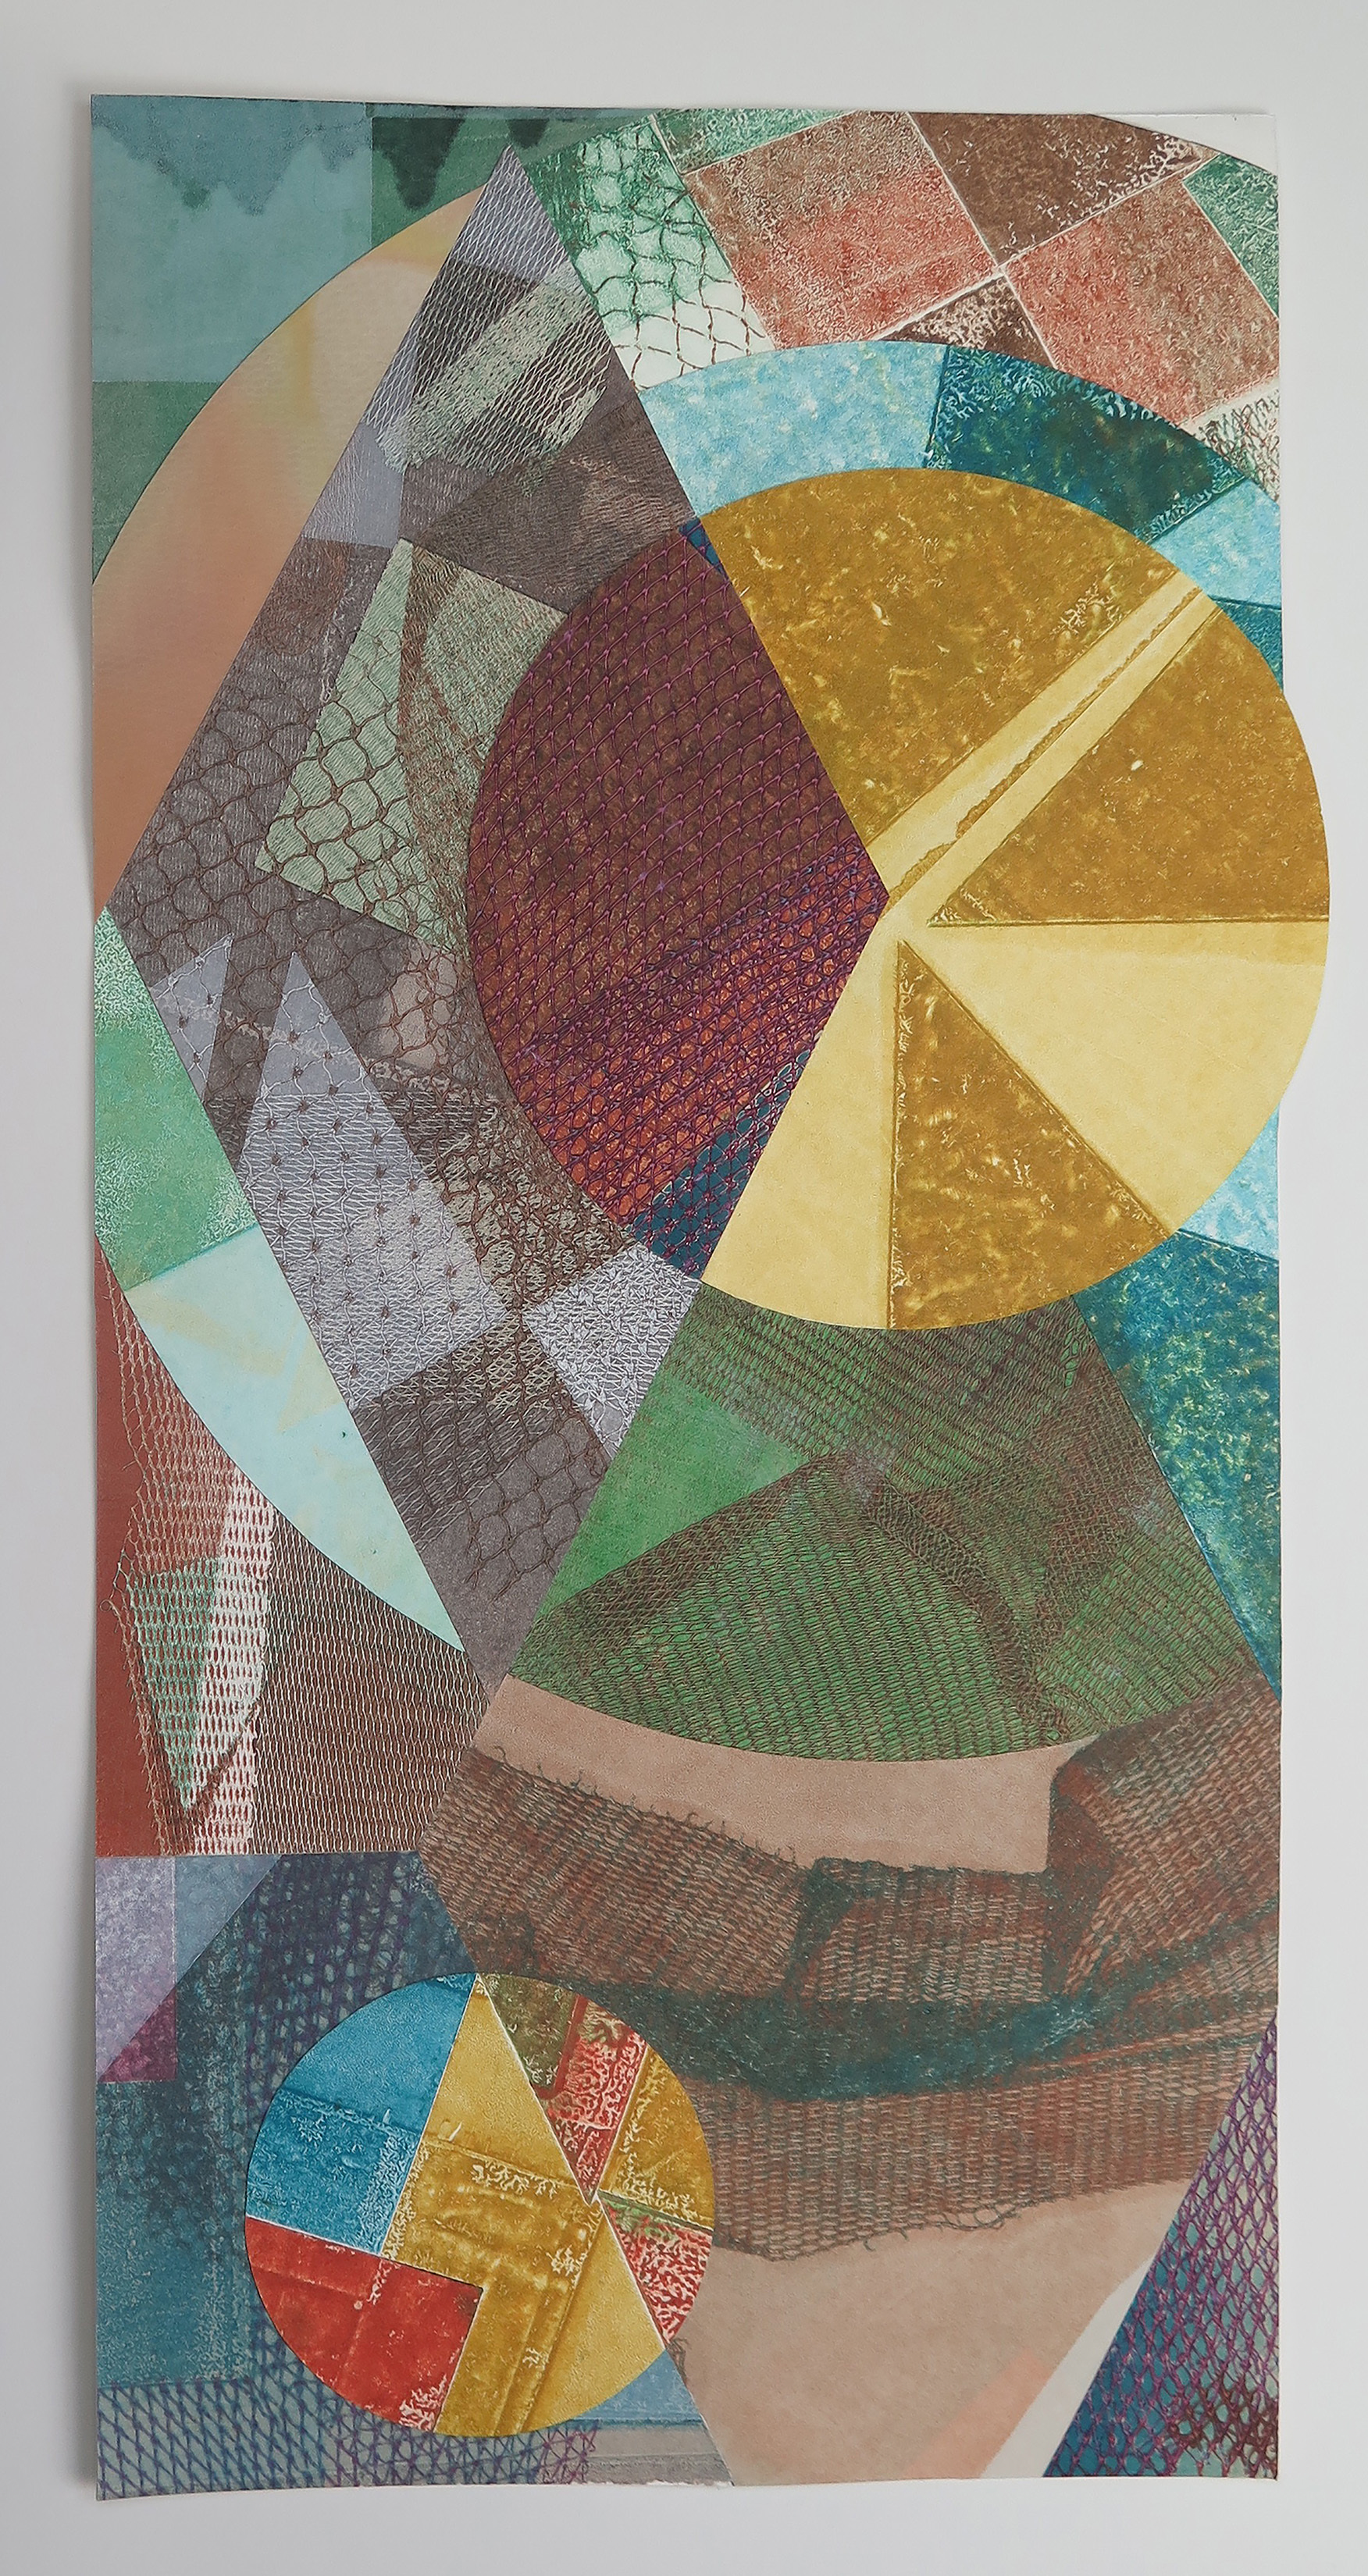 Kimberly Dummons, Circle Dance in 3/4 Time, 2019, monotype collage, 18" x 27"